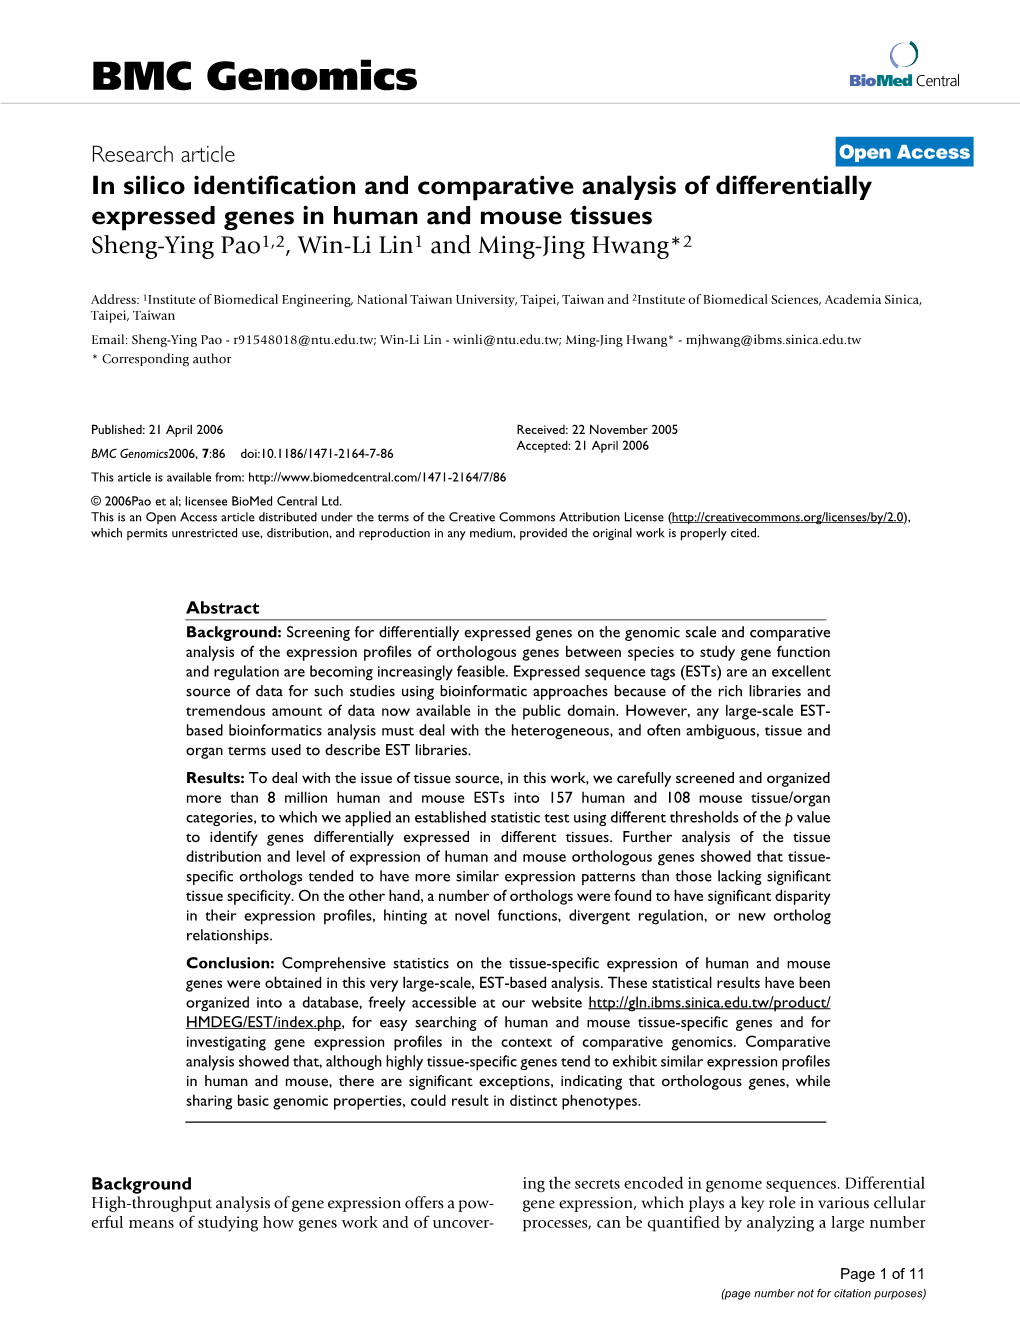 In Silico Identification and Comparative Analysis of Differentially Expressed Genes in Human and Mouse Tissues Sheng-Ying Pao1,2, Win-Li Lin1 and Ming-Jing Hwang*2